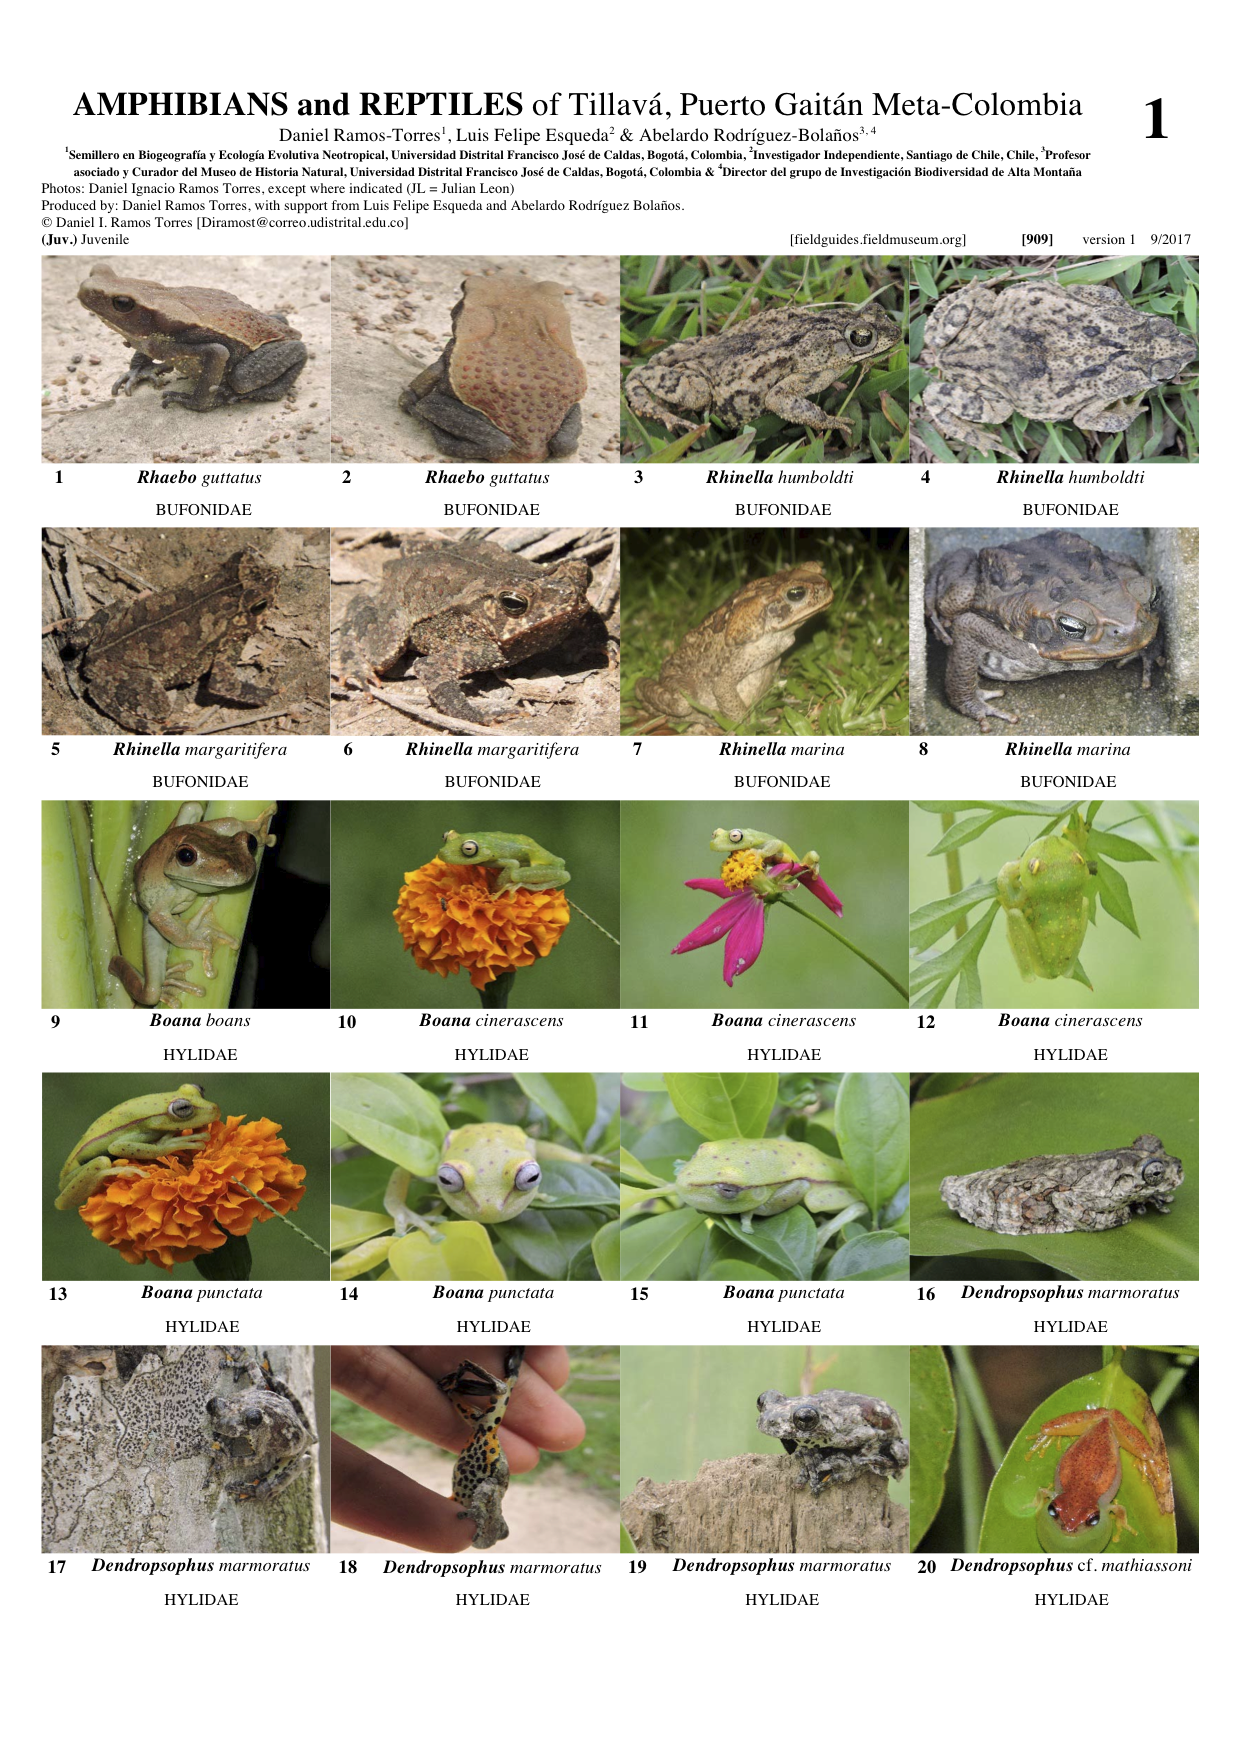  909_colombia_amphibians_and_reptiles_of_tillava.pdf